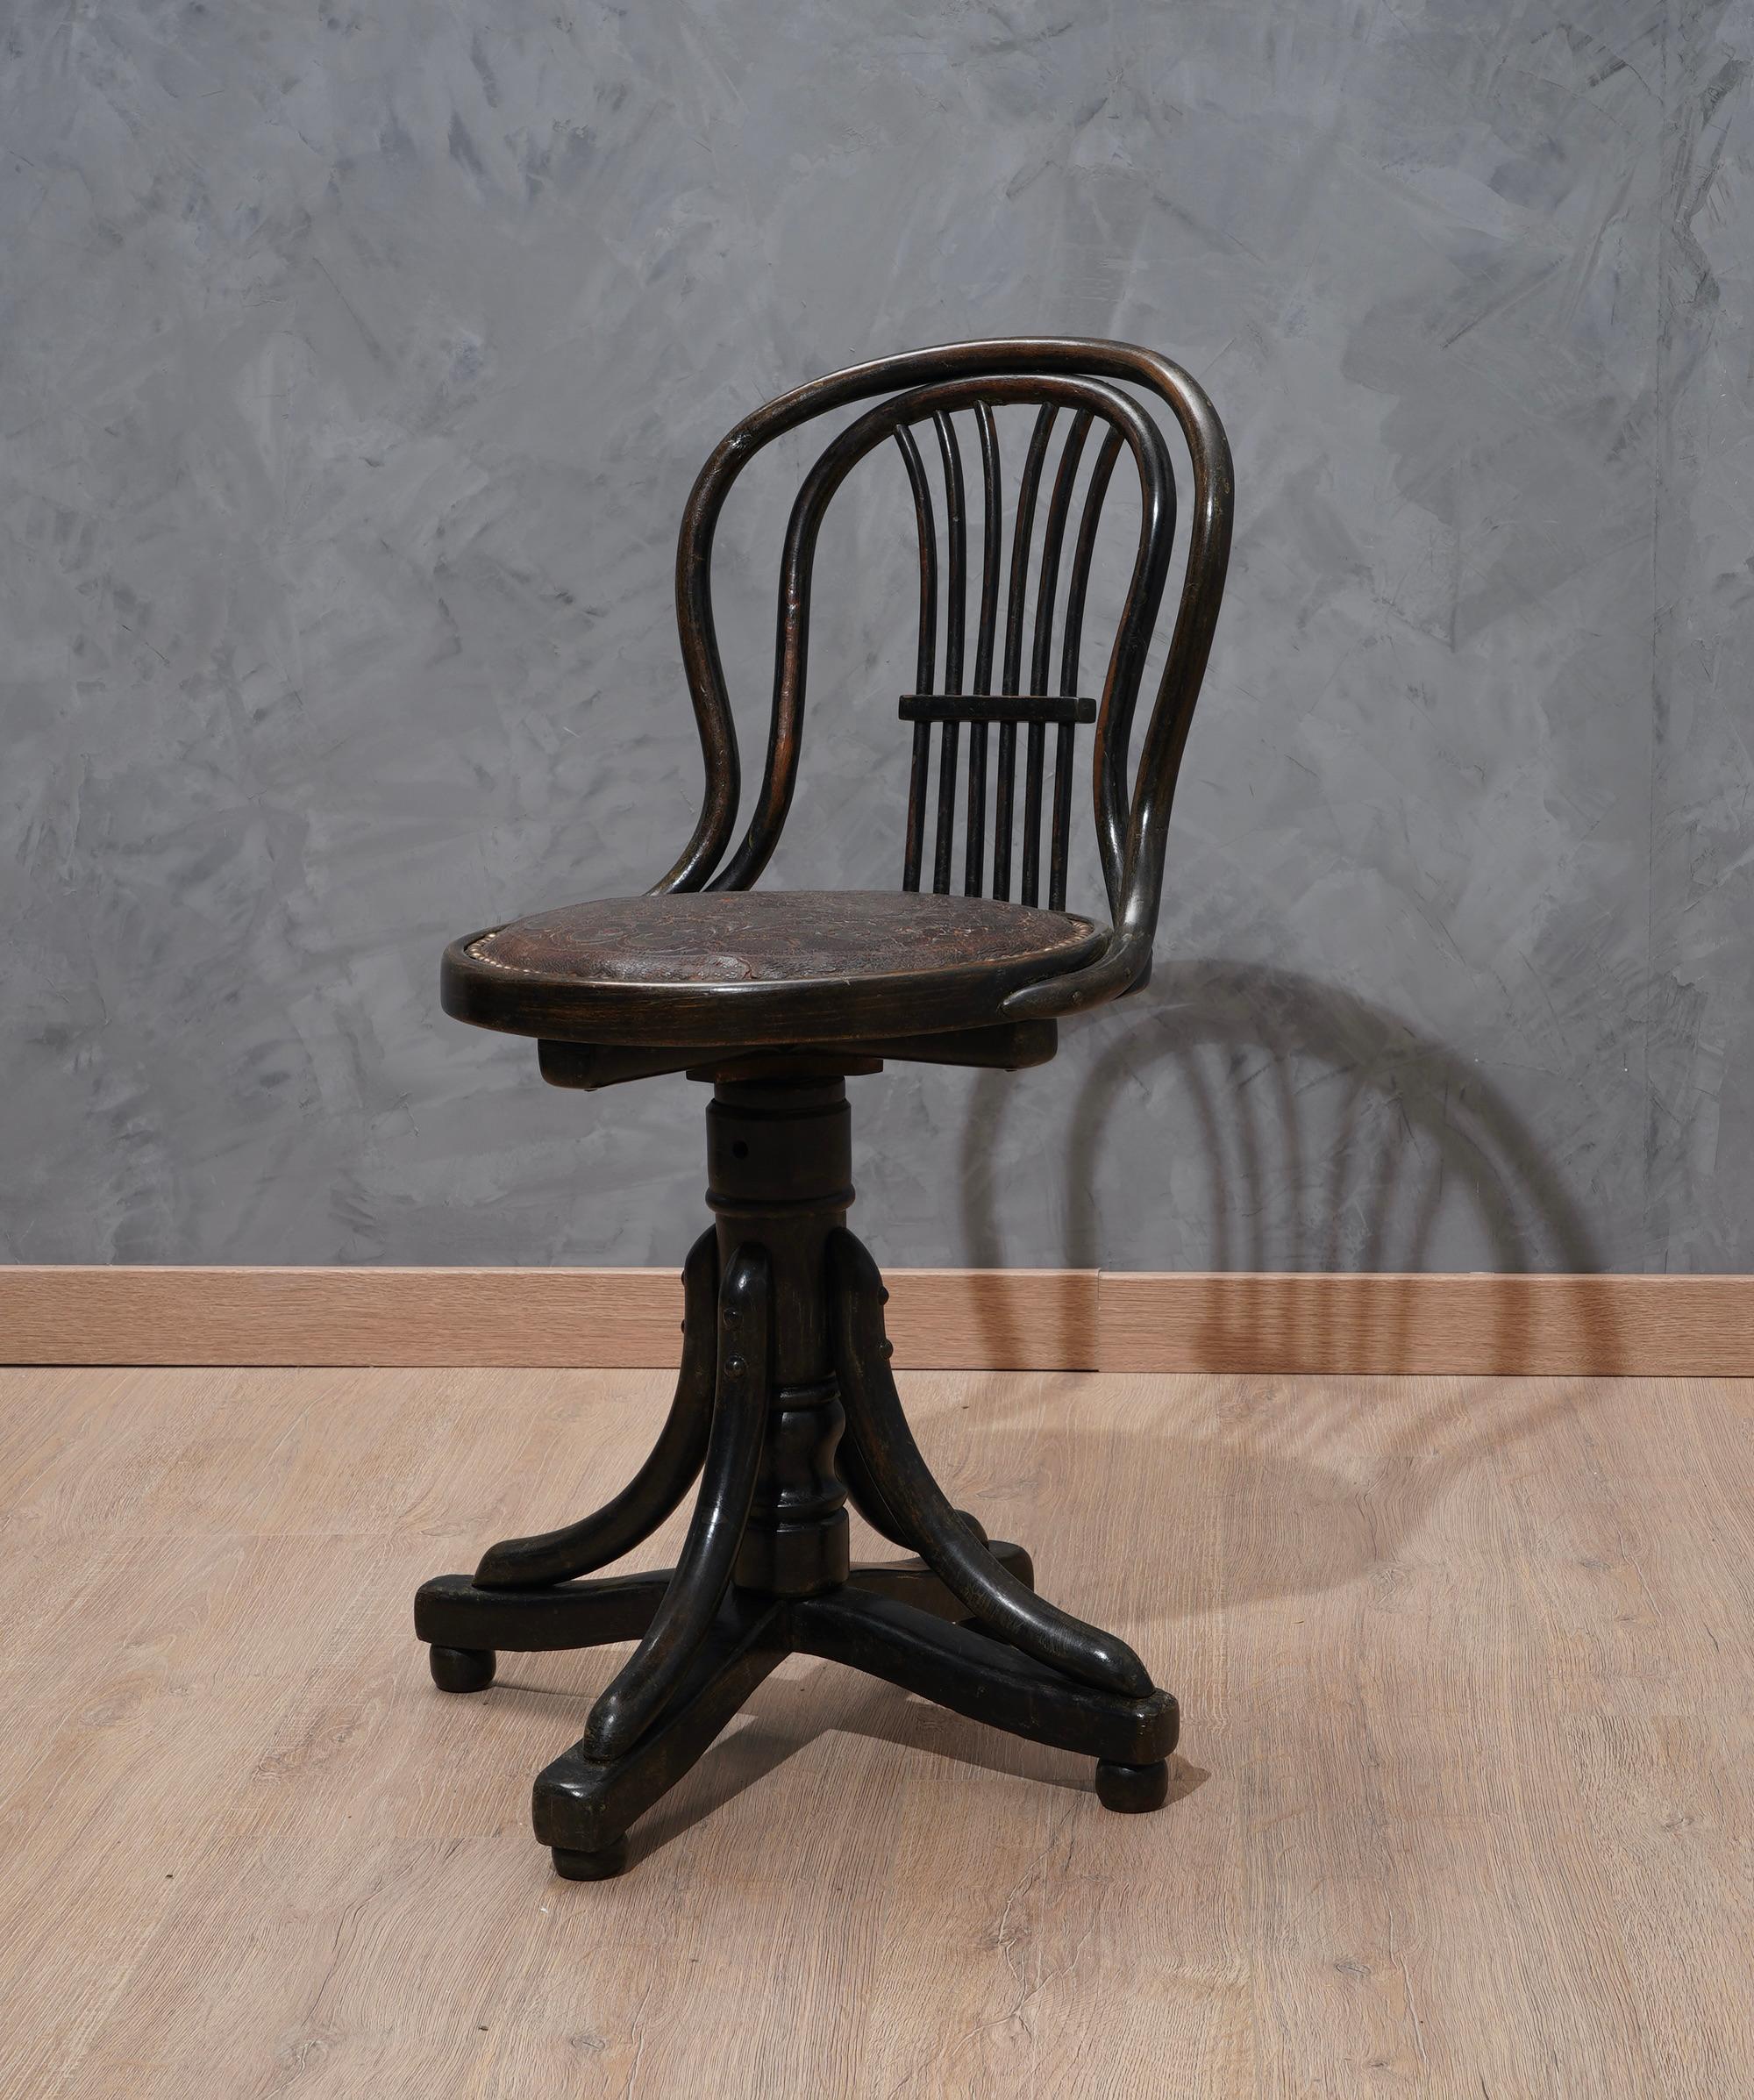 Thonet swivel chair for piano from the end of the 1800s.

The chair in bent wood, is all in wood polished in black shellac. The seat, round in shape, is still covered with its original leather and all around its metal buttons. The backrest is formed